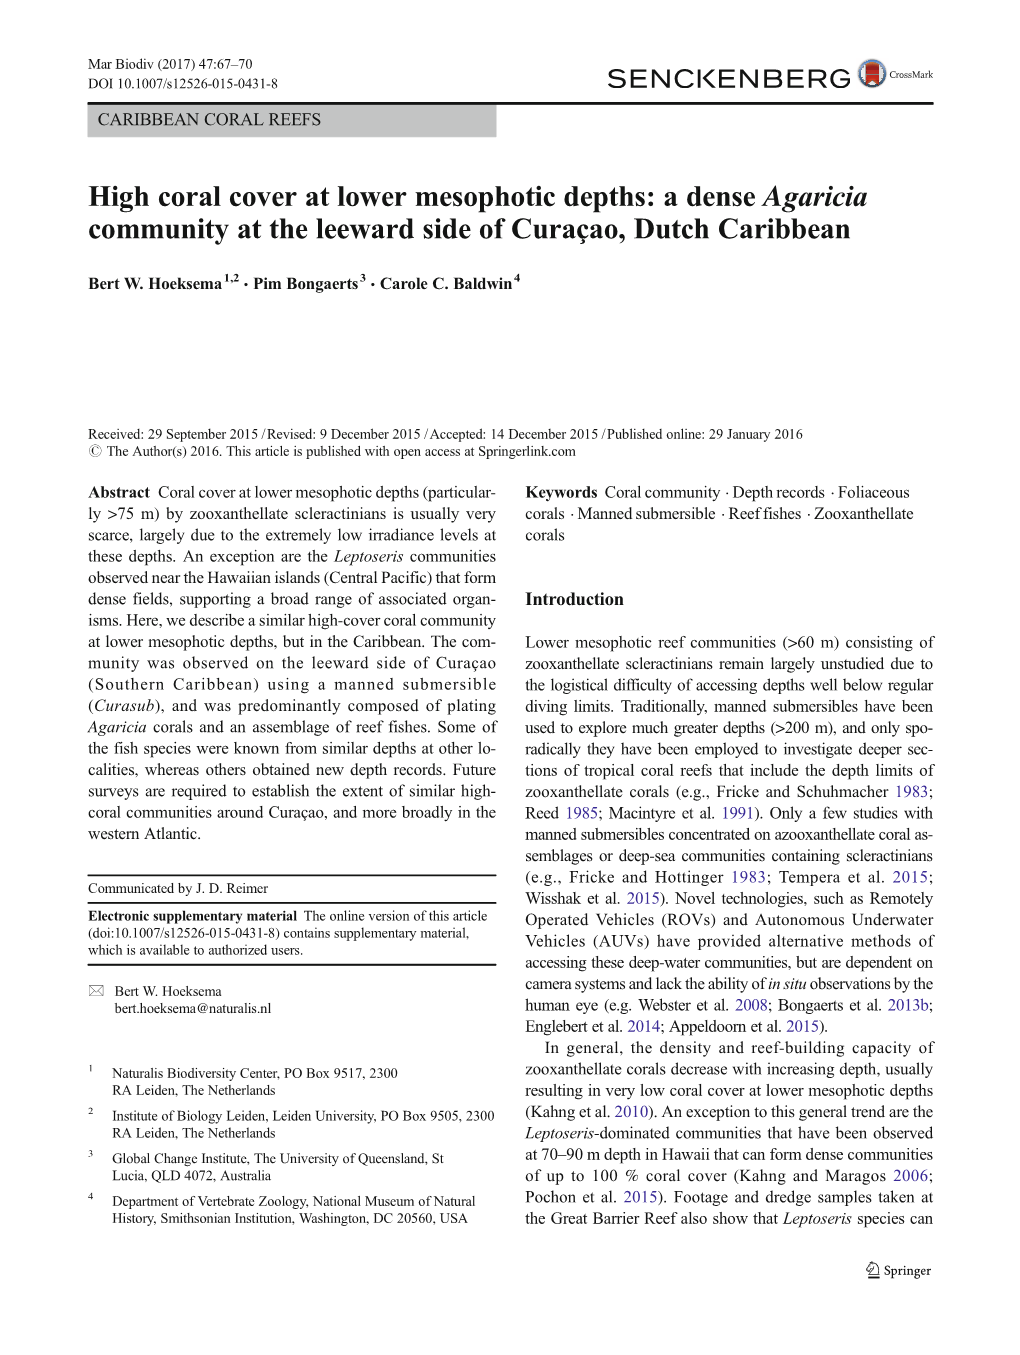 High Coral Cover at Lower Mesophotic Depths: a Dense Agaricia Community at the Leeward Side of Curaçao, Dutch Caribbean